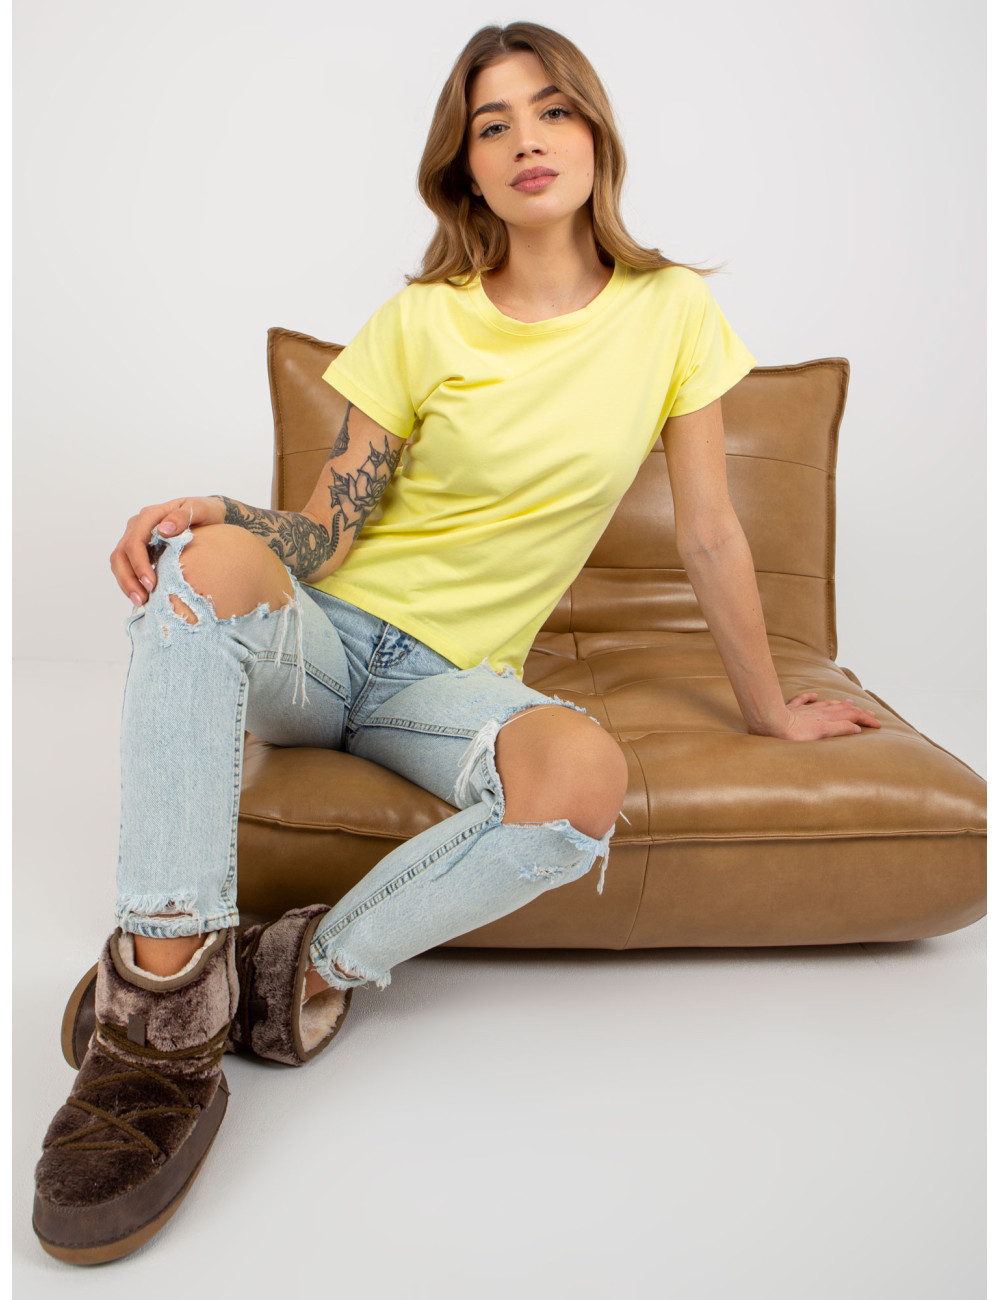 Light yellow solid color basic t-shirt with round neckline  